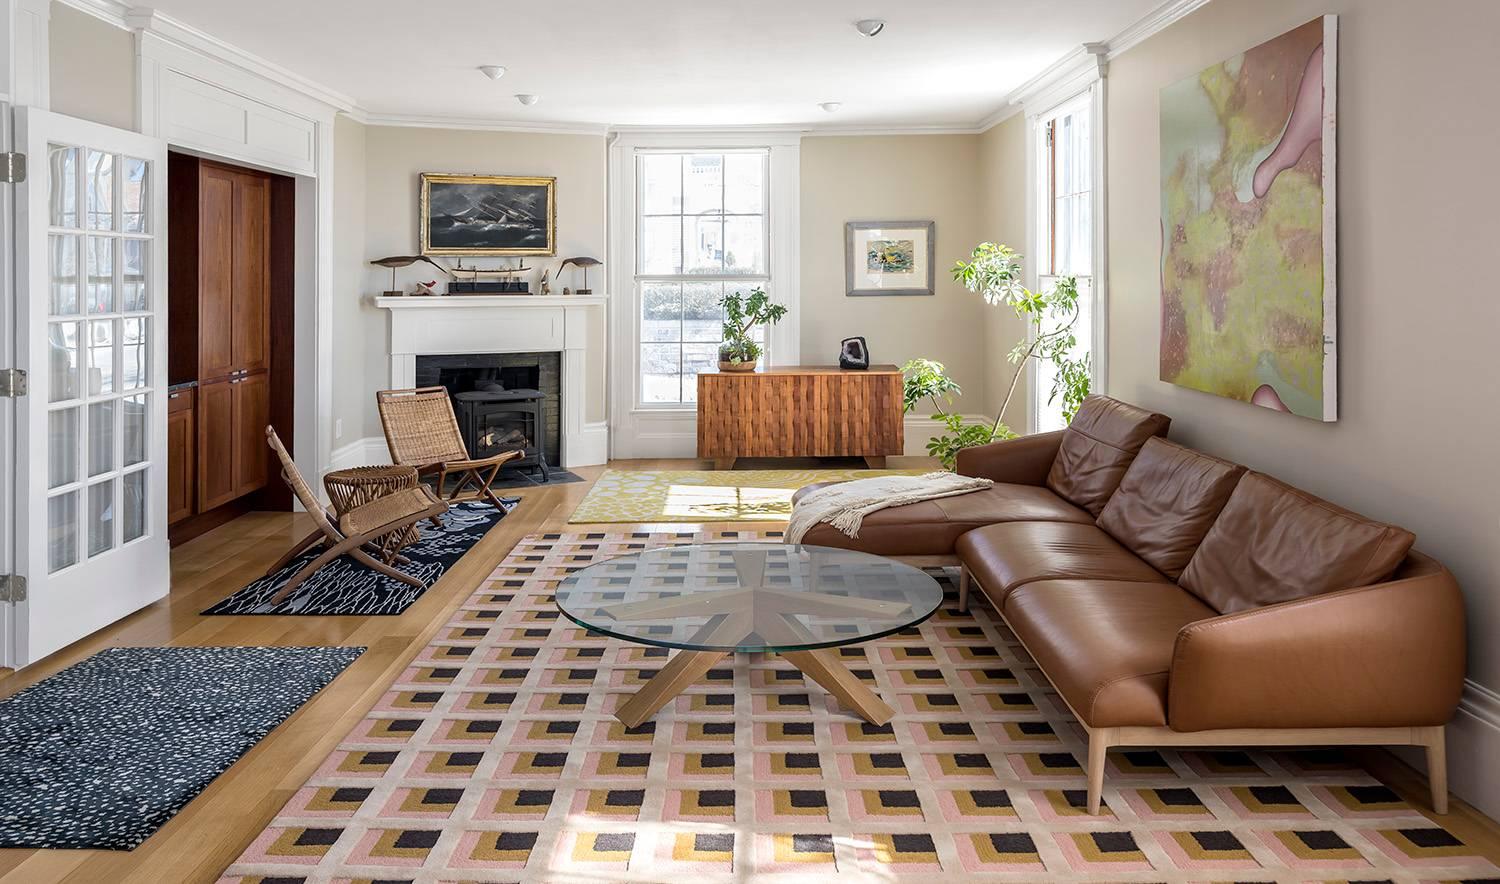 The June / Rosebud area rug by Angela Adams features simple geometric shapes and fine, meticulous craftsmanship. This design is a nostalgic nod to traditional pattern with a modern twist. Inspired by and named after a dear old friend of Angela’s,